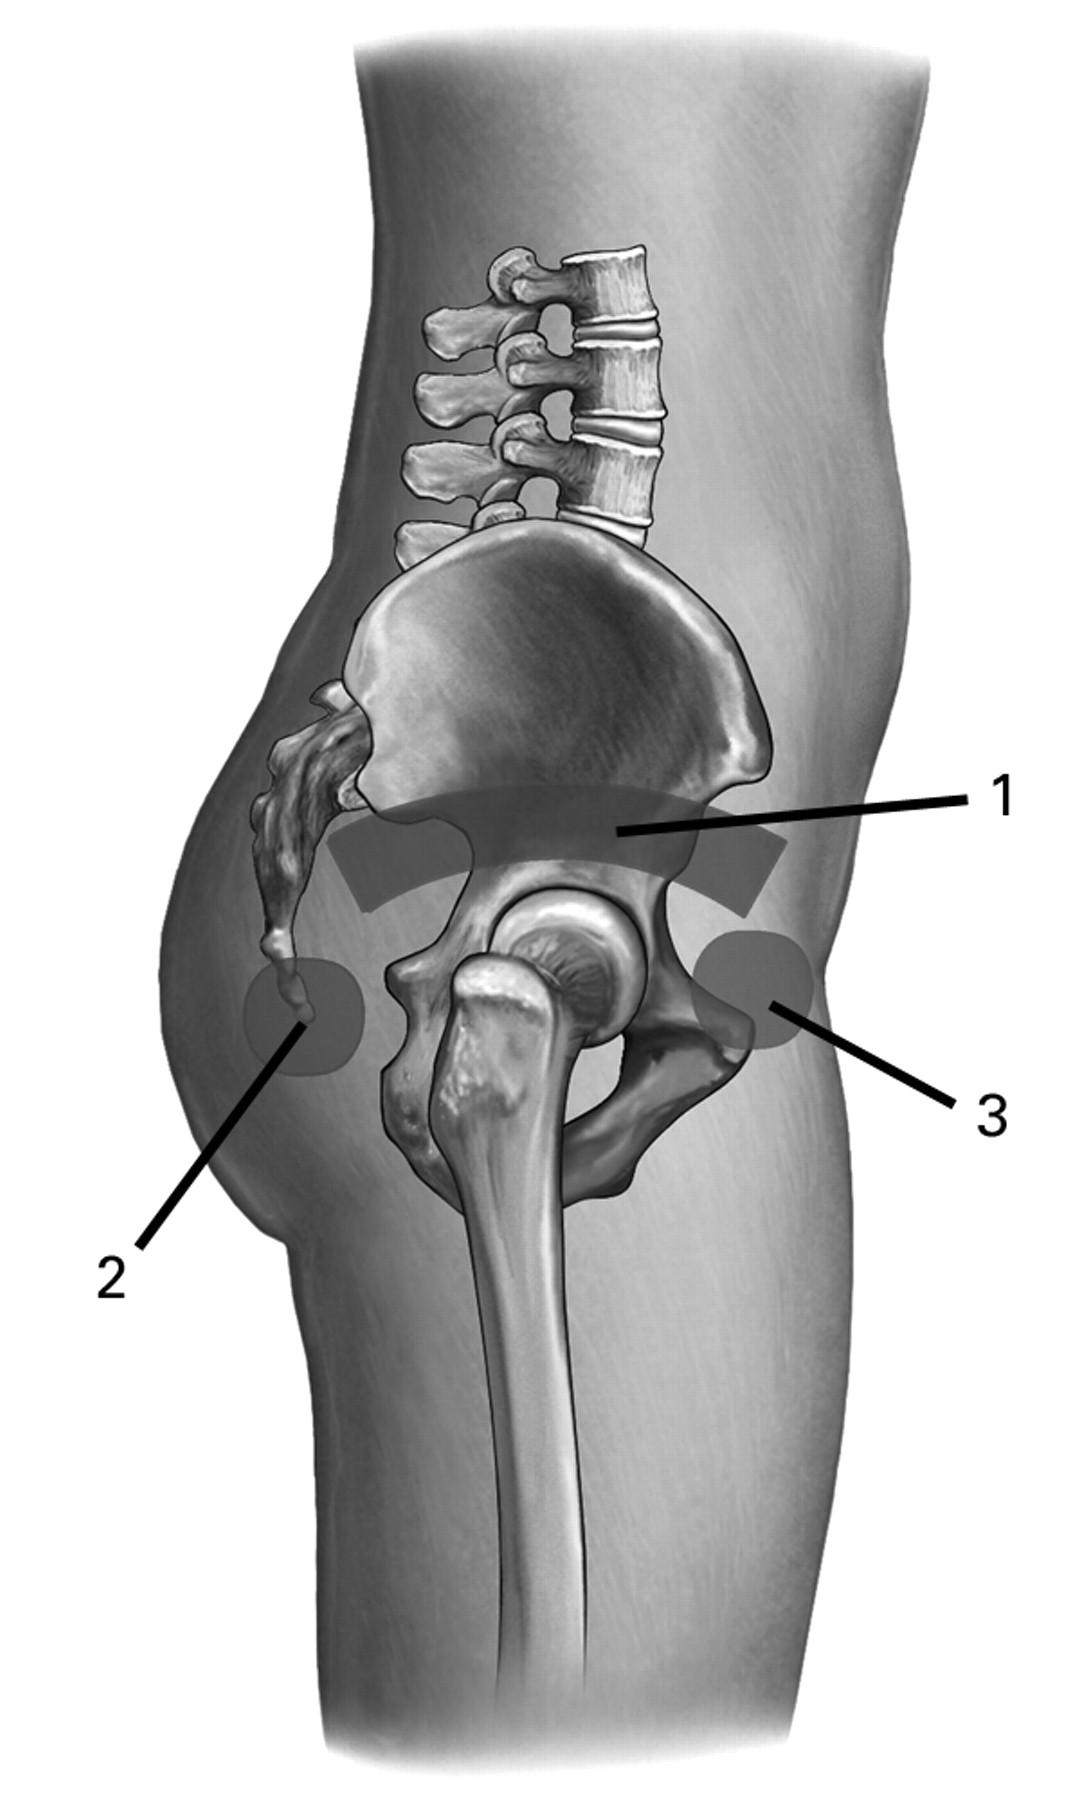 Fig. 2  
            Diagram of the sites of treatment which include 1) the skin just above the primary surgical incision, 2) the buttock area posterior to the hip, and 3) the skin infero-lateral to the anterior superior iliac spine (areas of deeper grey shading).
          